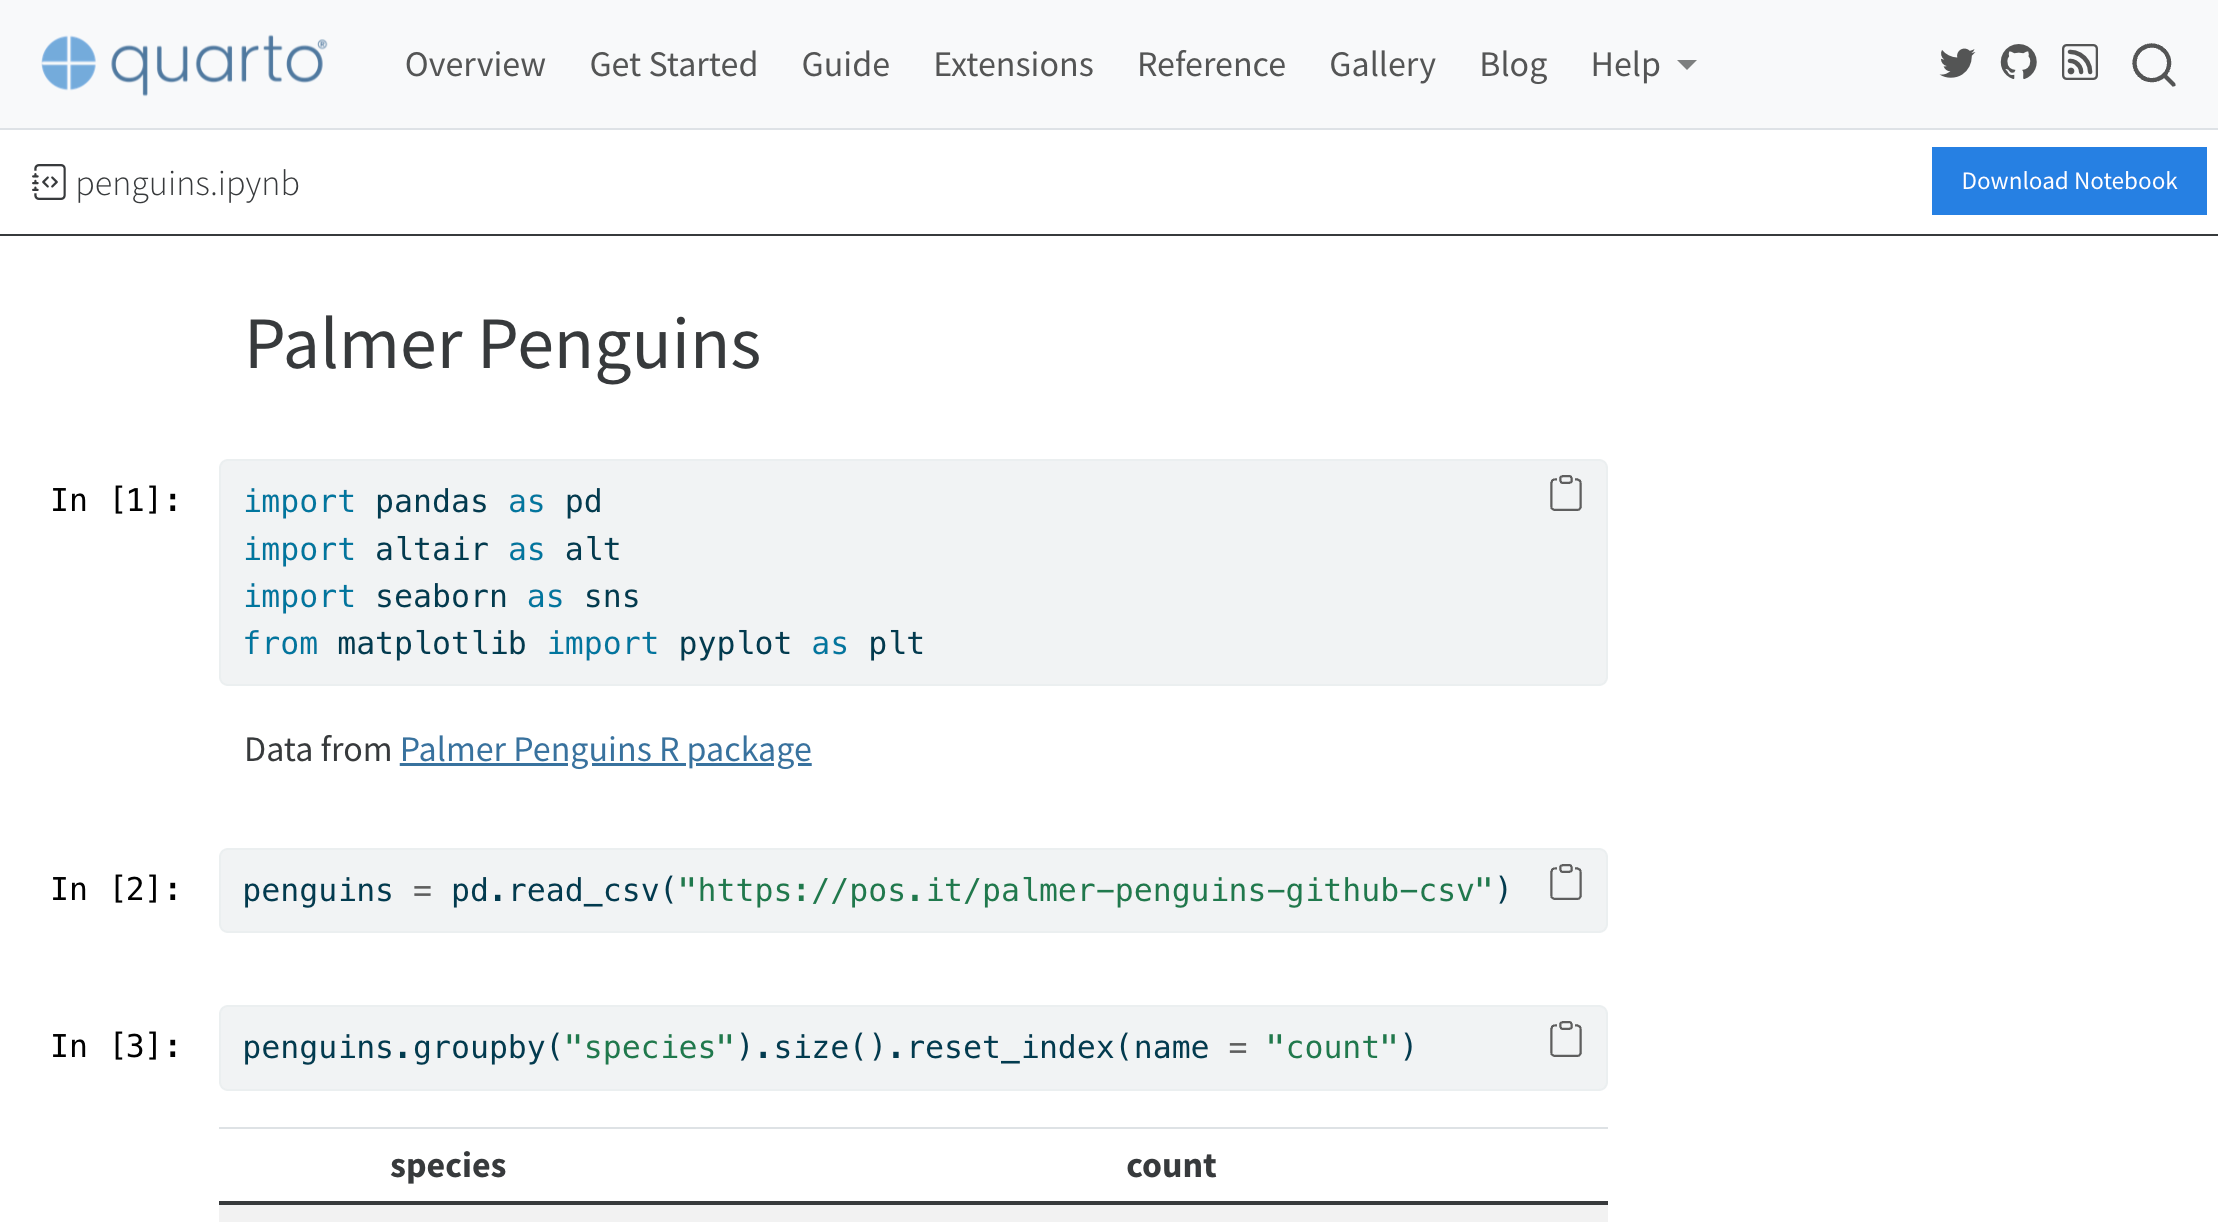 A screenshot of webpage with the title 'penguins.ipynb', a large blue button labelled 'Download Notebook', followed by the notebook contents.